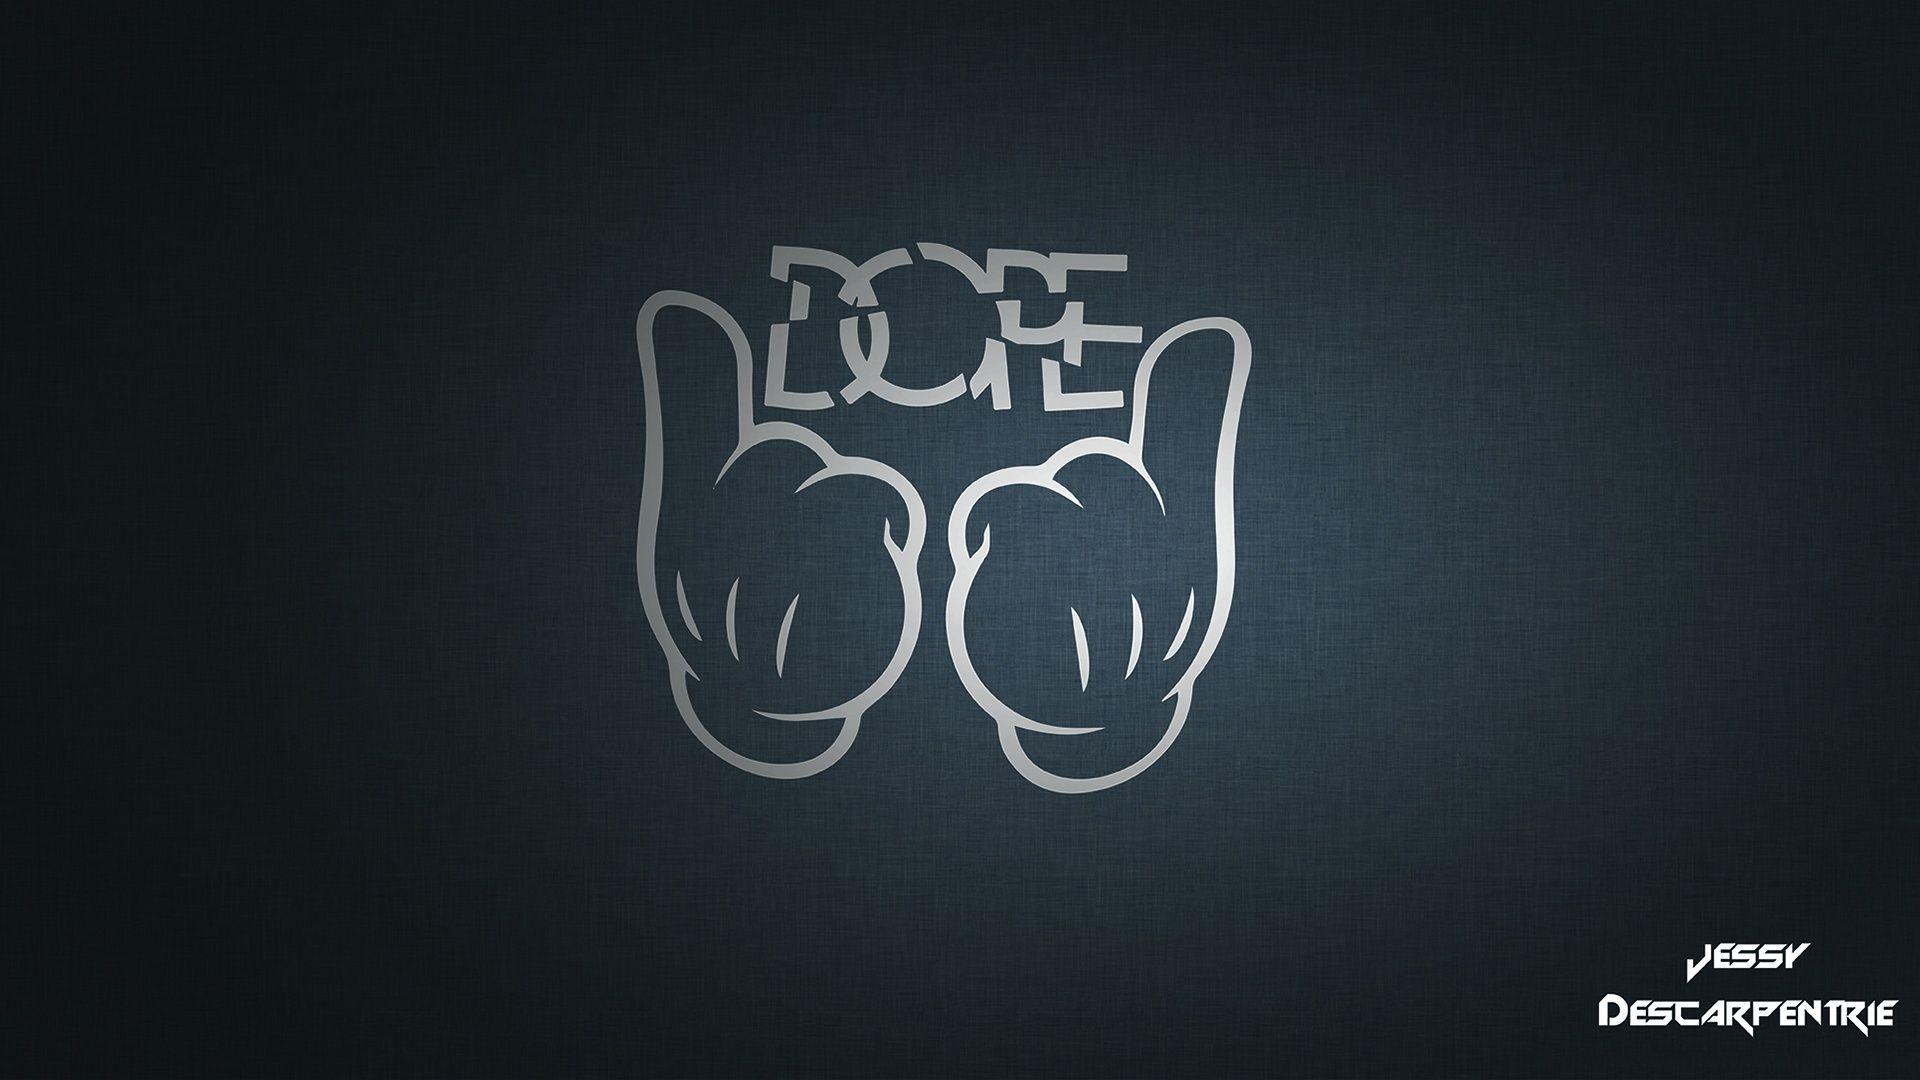 dope couture logo wallpaper